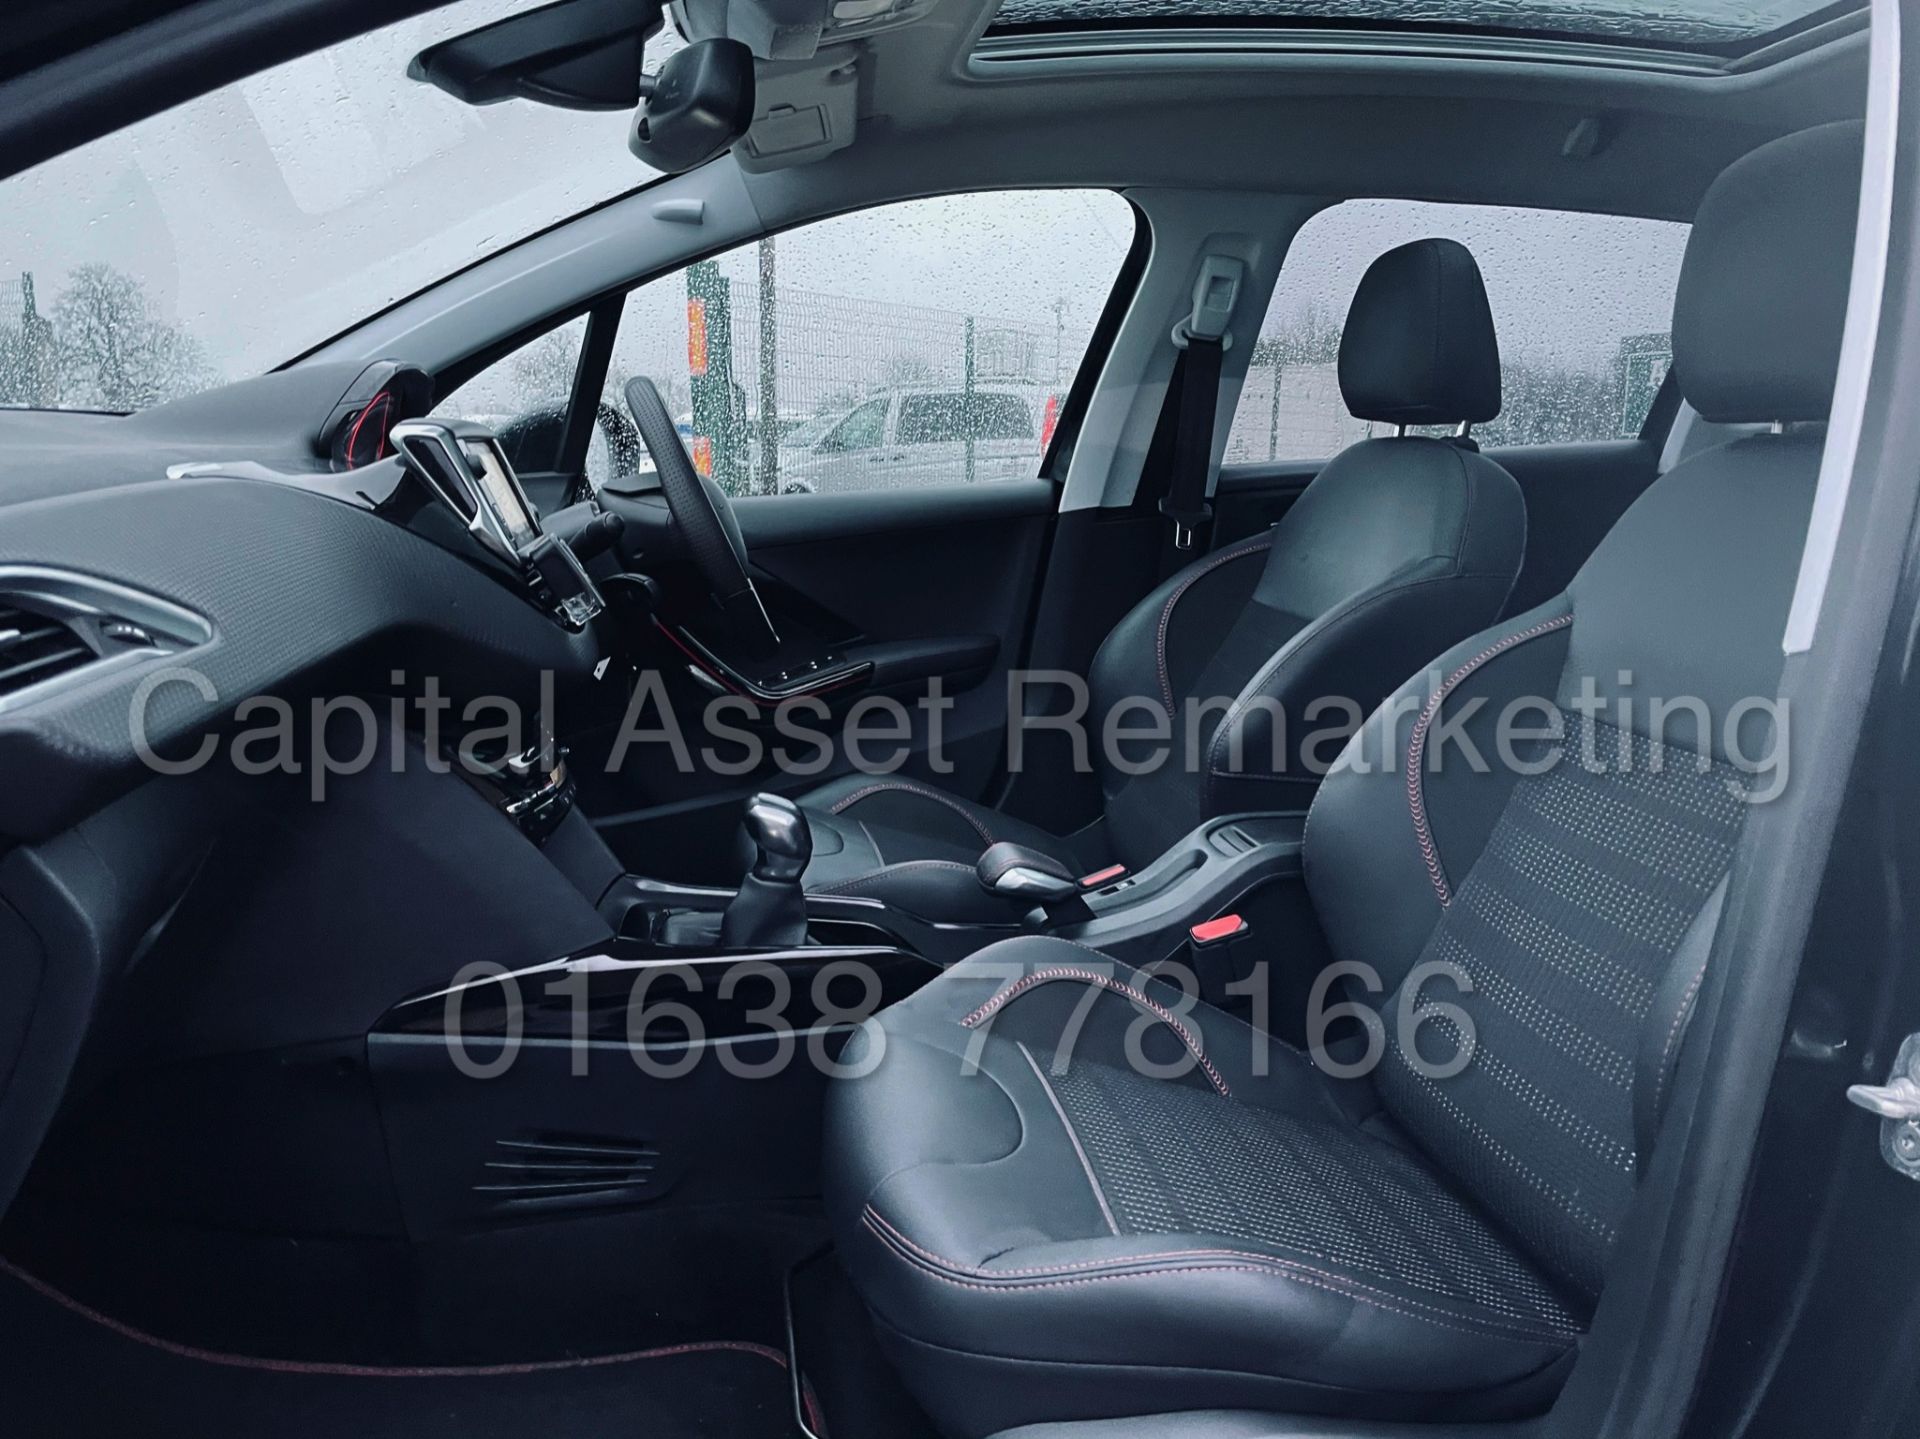 PEUGEOT 2008 *GT LINE* SUV / MPV (2019 - EURO 6) '1.5 BLUE HDI' *SAT NAV - PAN ROOF' *LOW MILES* - Image 20 of 46